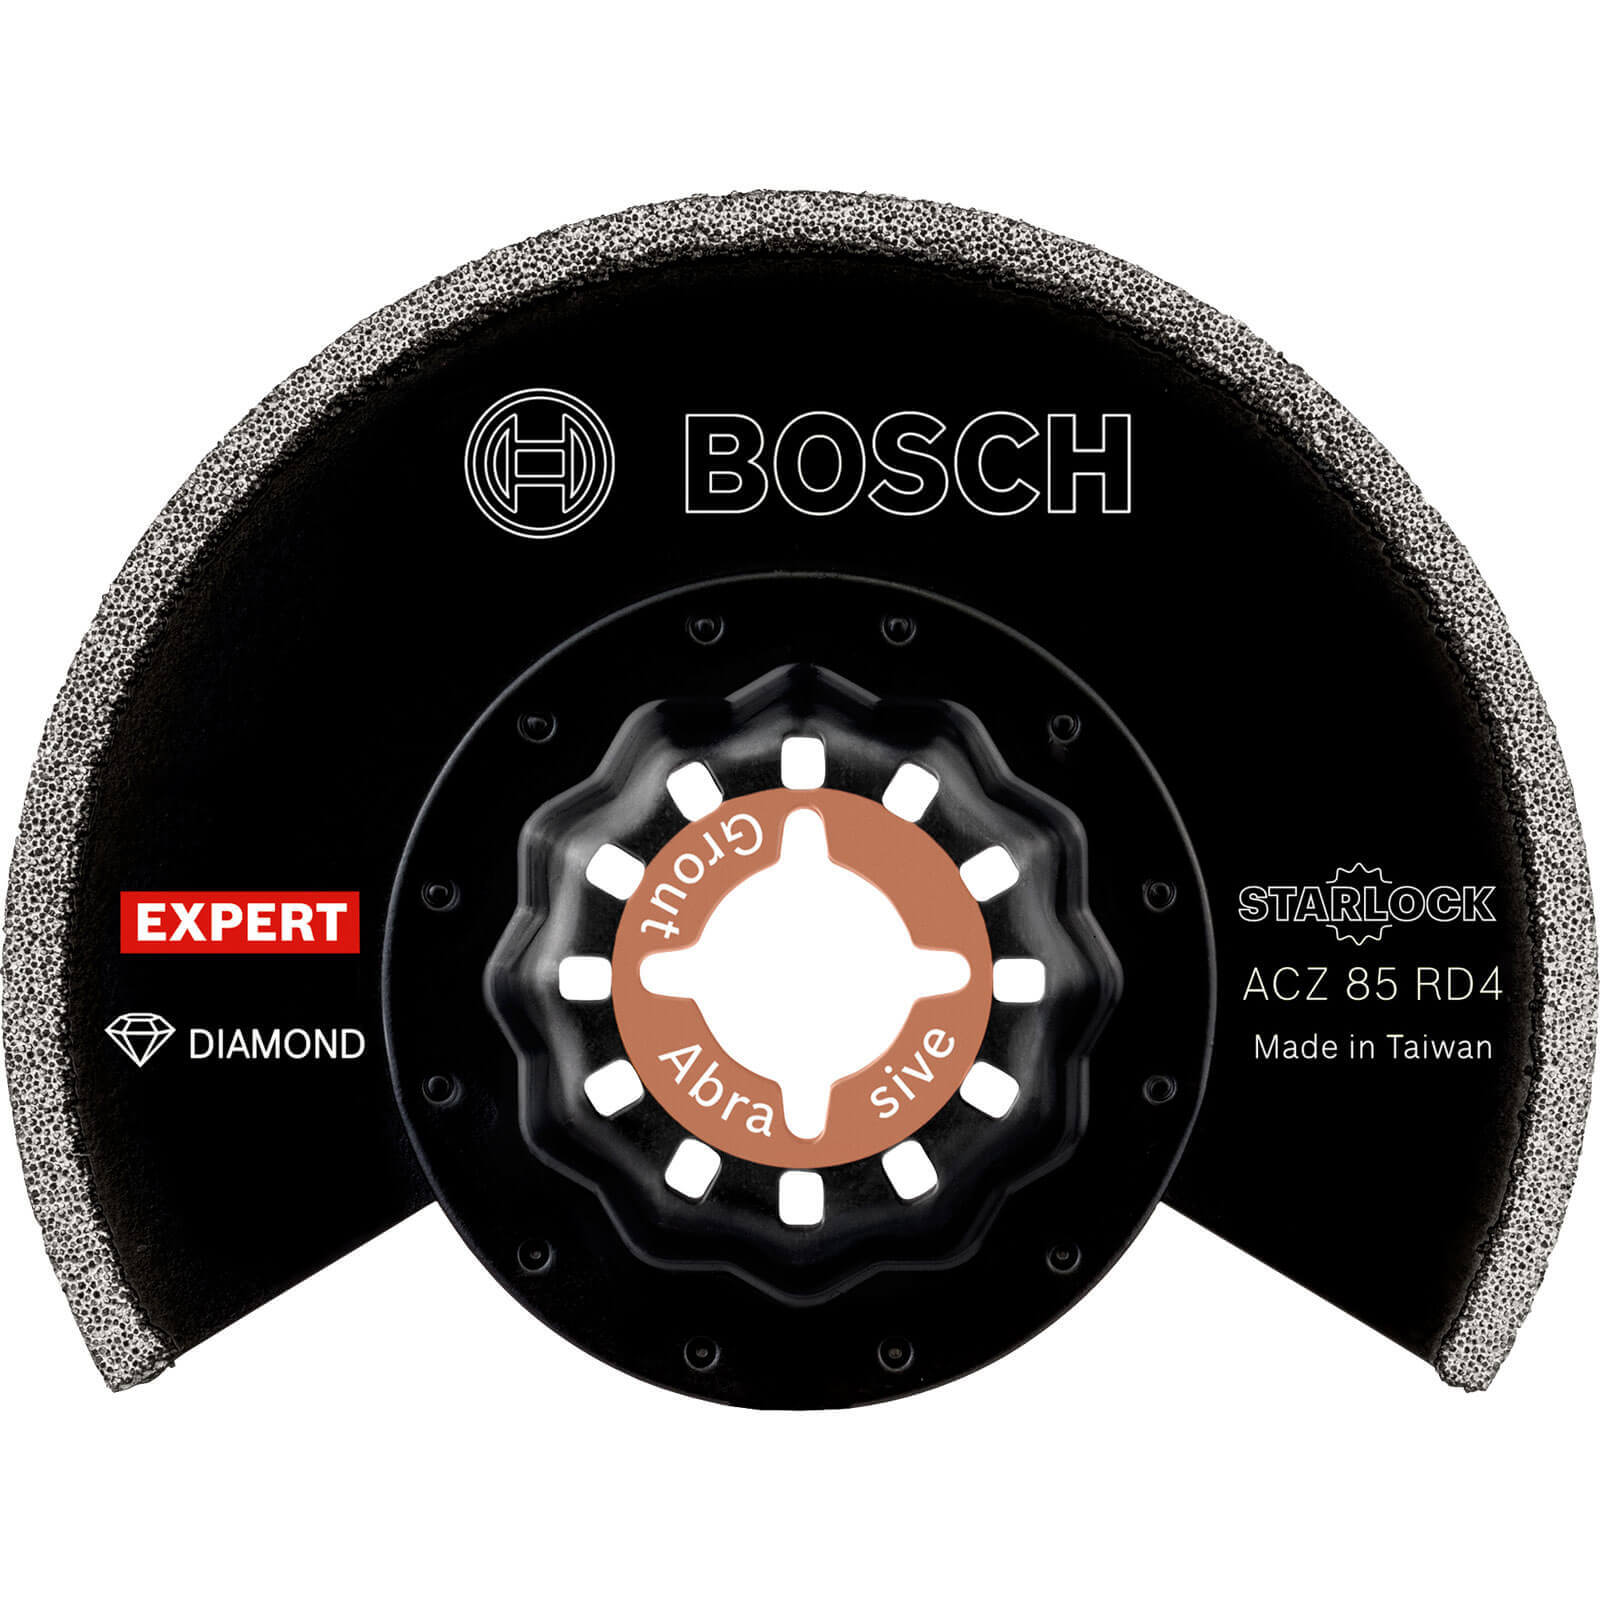 Bosch Expert ACZ 85 RD4 Abrasive and Grout Oscillating Multi Tool Segment Saw Blade 85mm Pack of 10